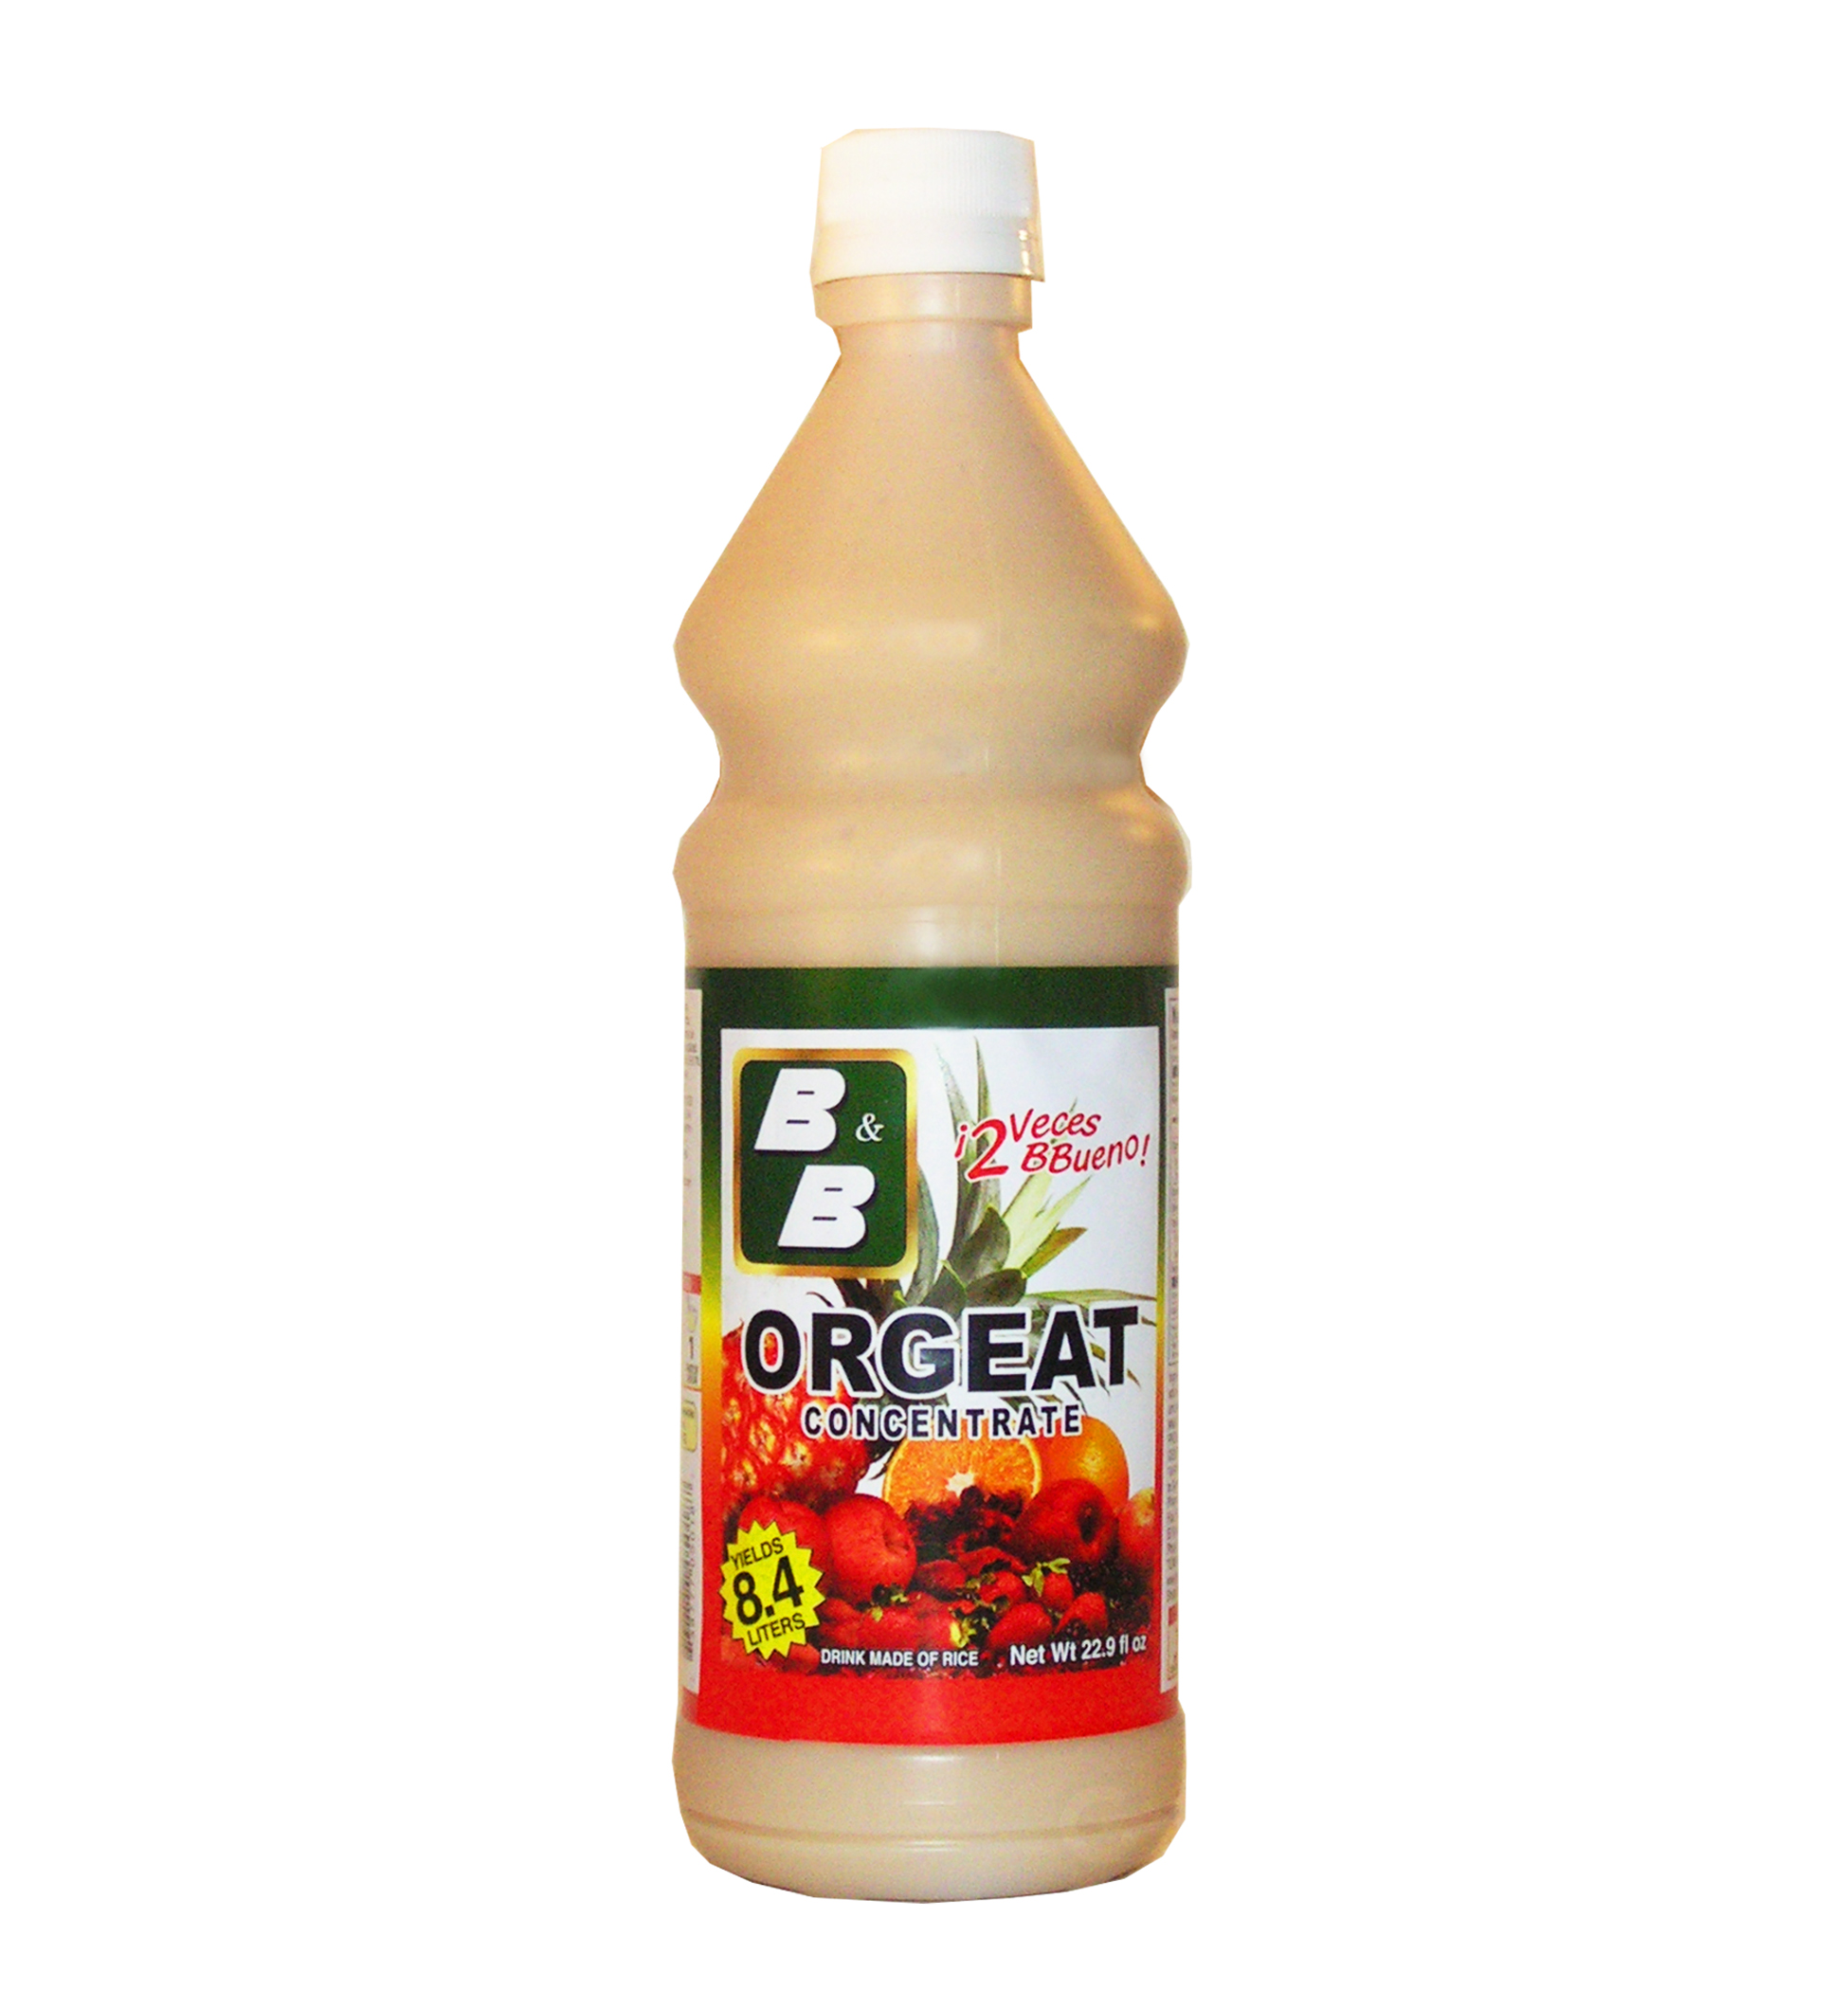 B&B Orgeat Concentrate 22.9 oz - Concentrado de Horchata (Pack of 1) - image 1 of 4